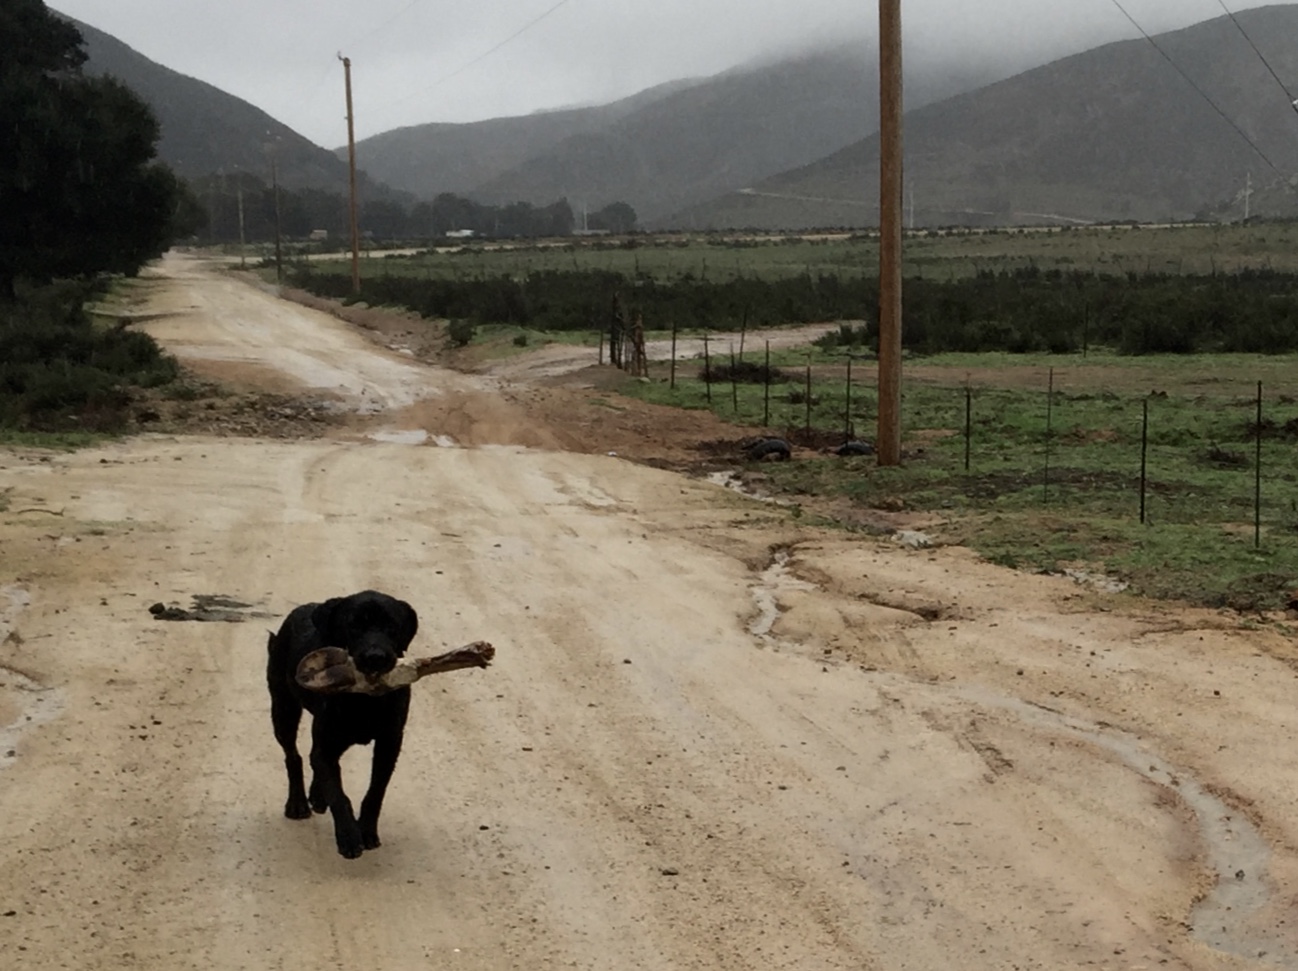 dog walking up the dirt road in the rain with a cow hoof